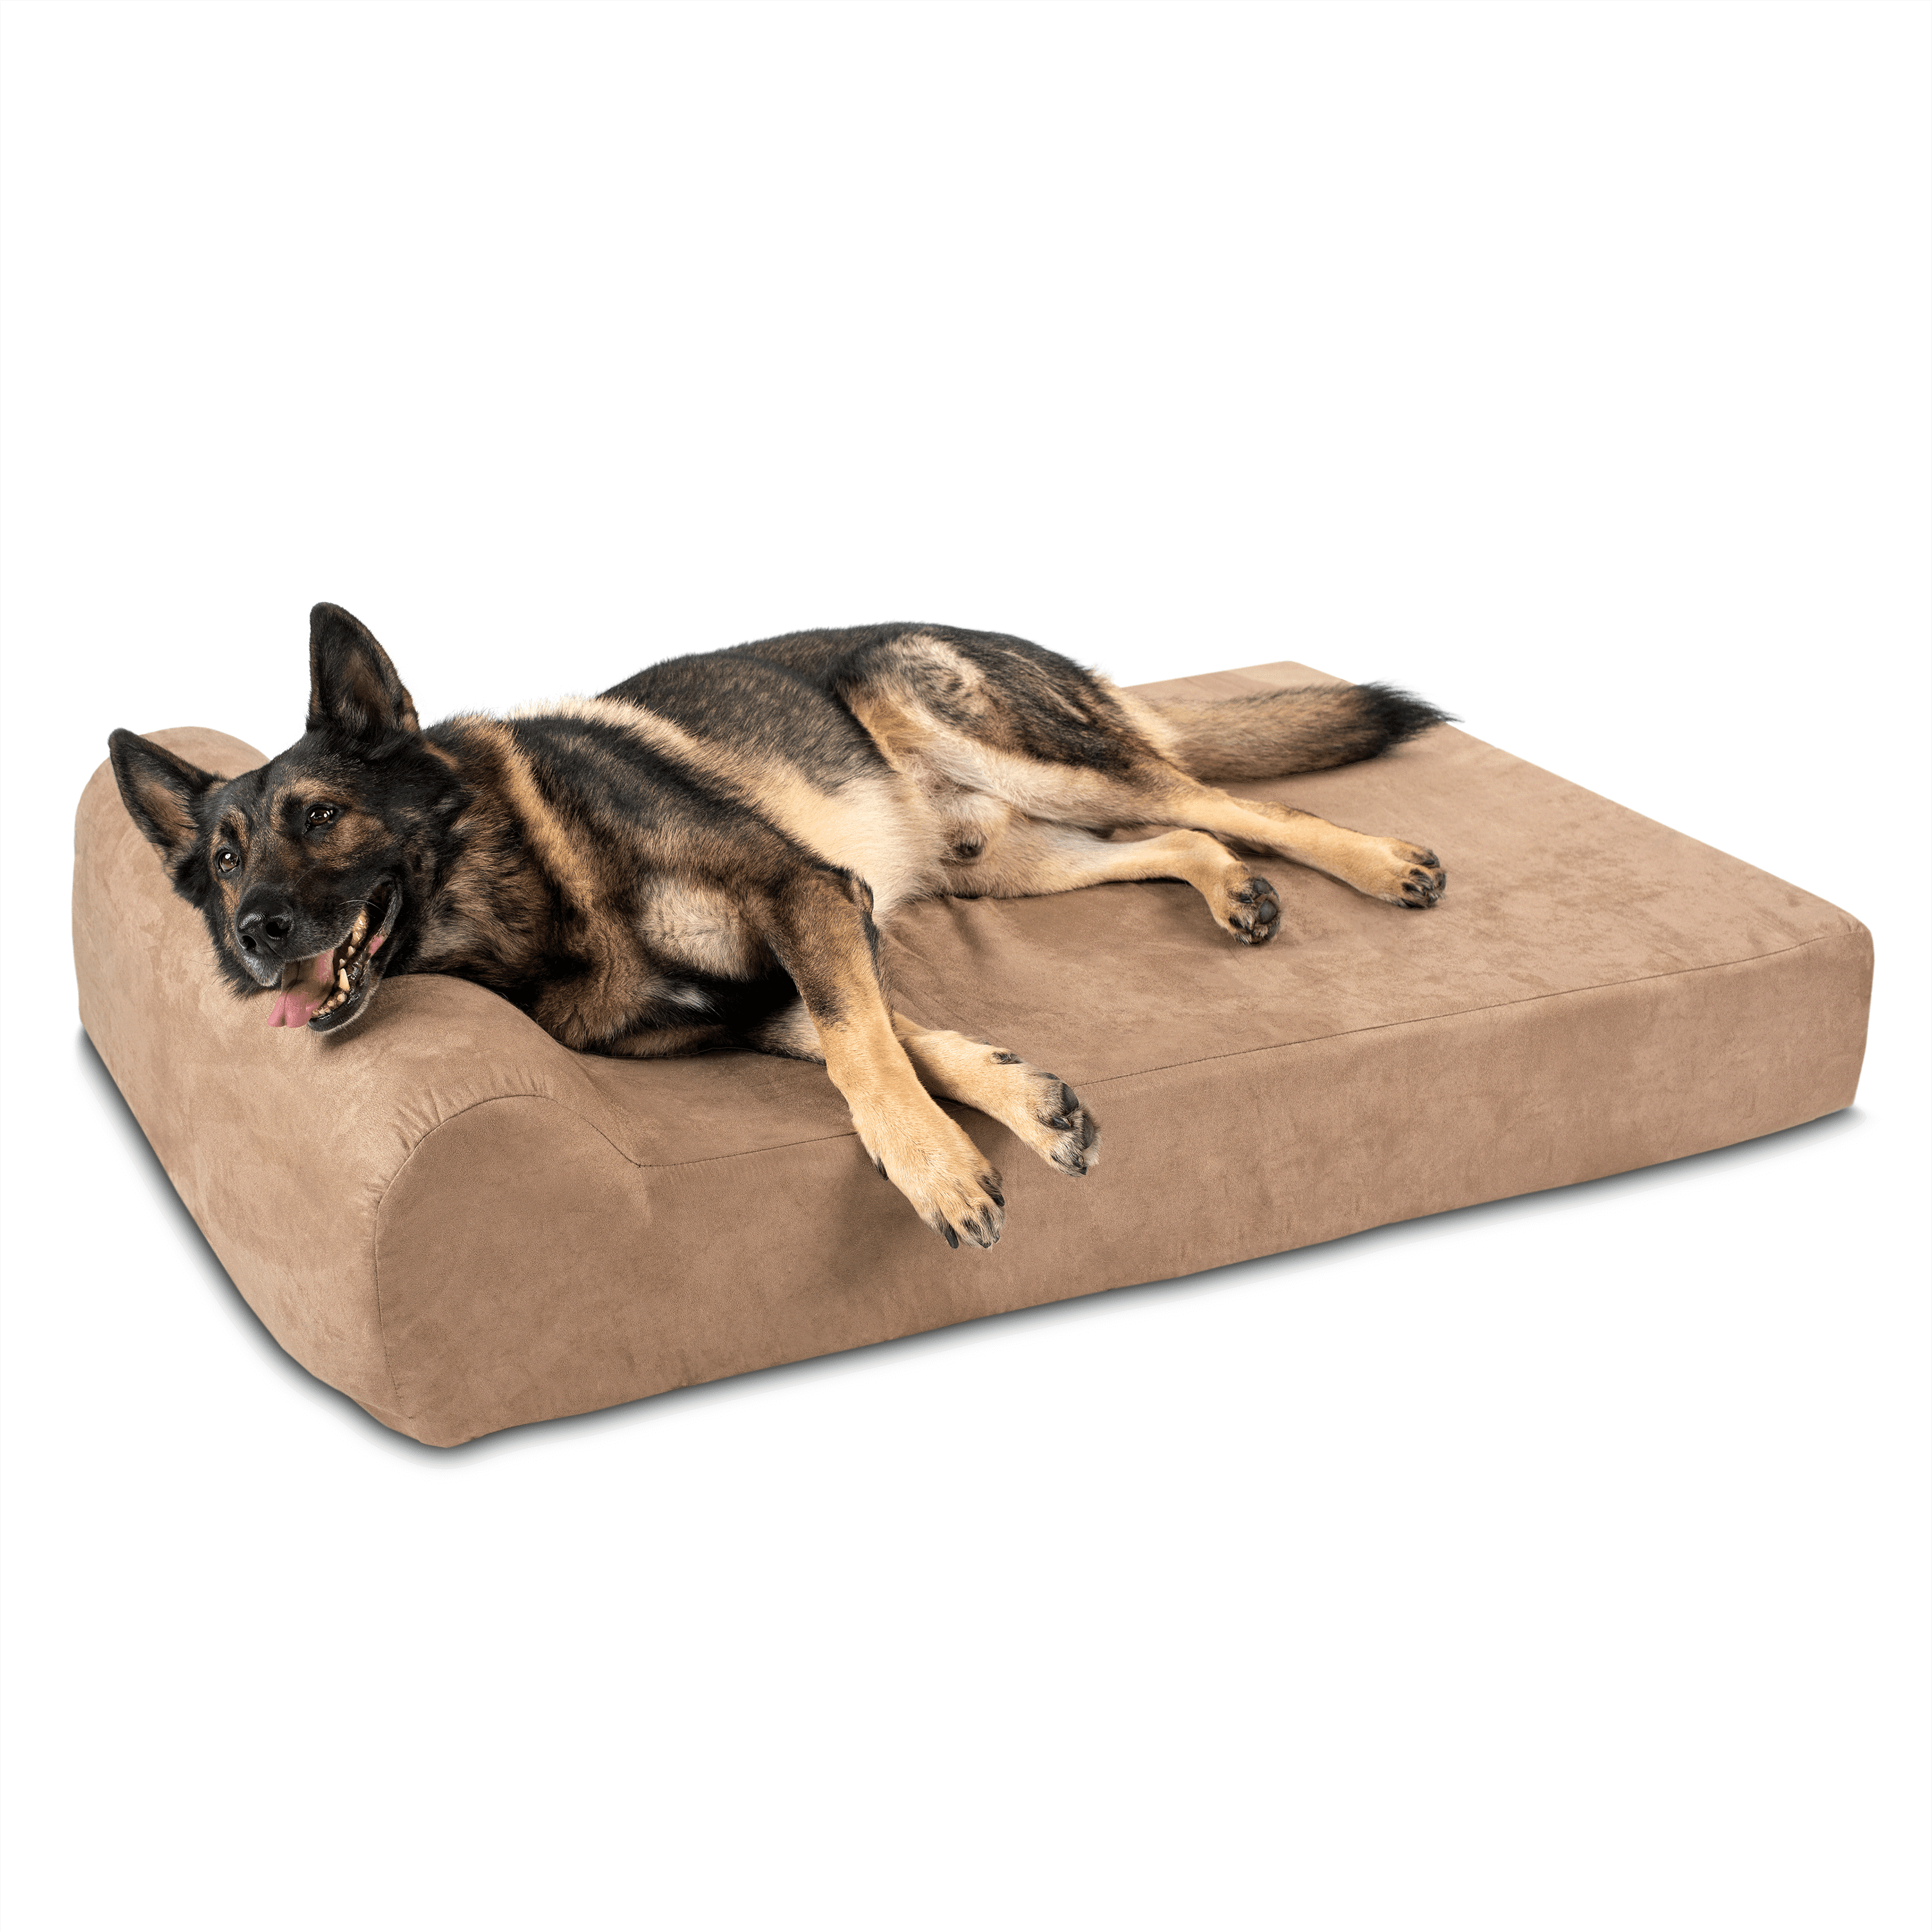 Big Barker 7" Pillow Top Orthopedic Dog Bed for Large and Extra Large